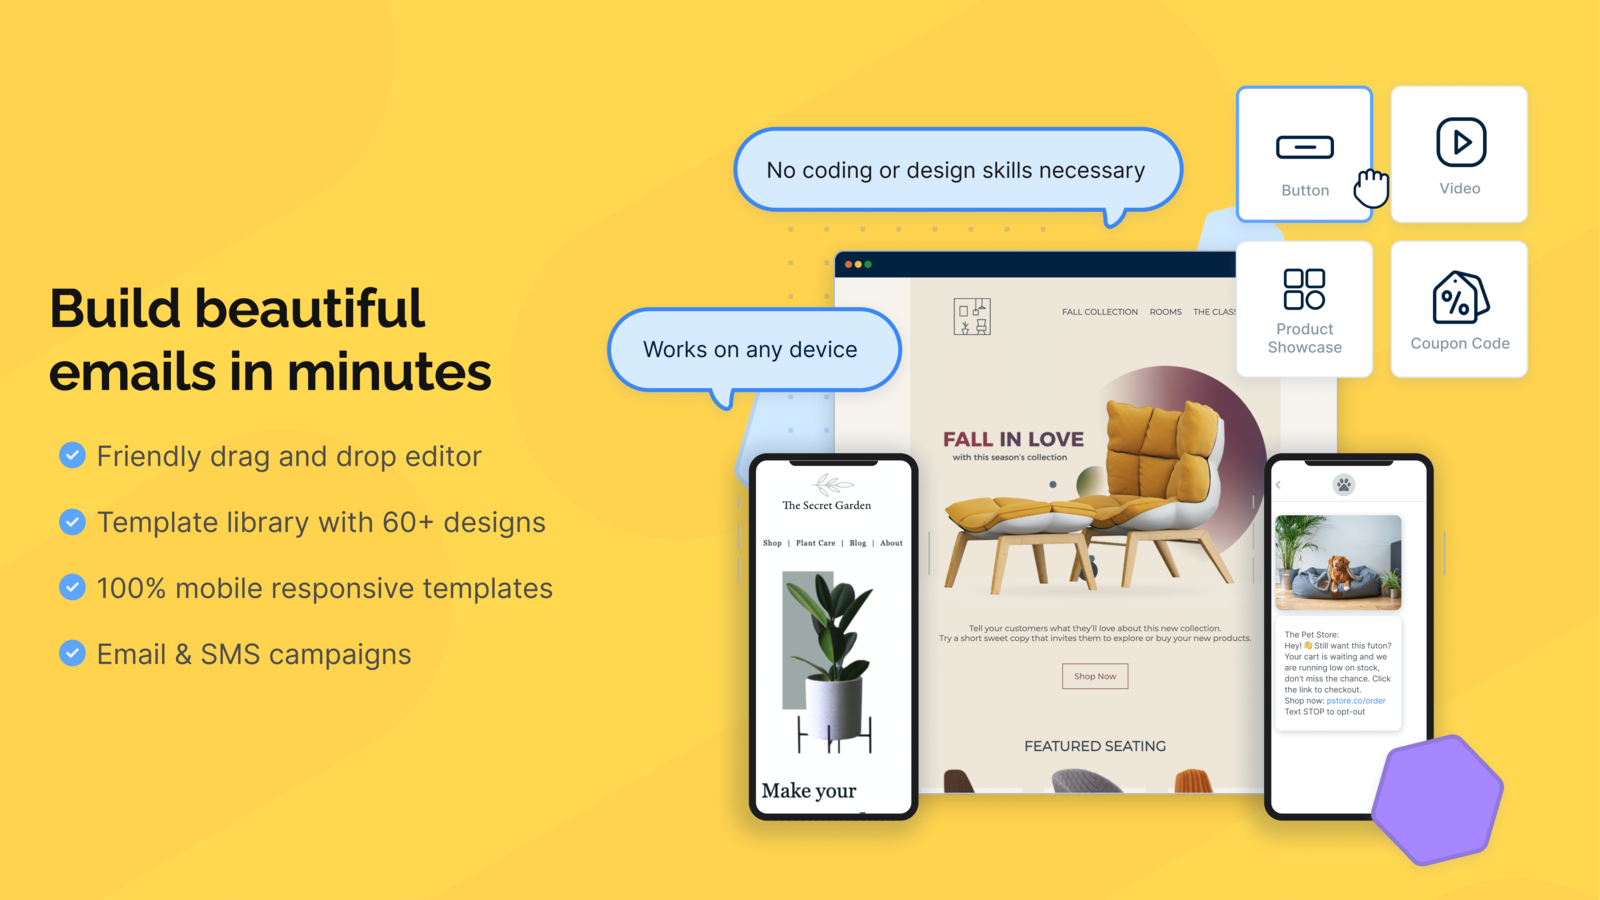 Build beautiful emails in minutes